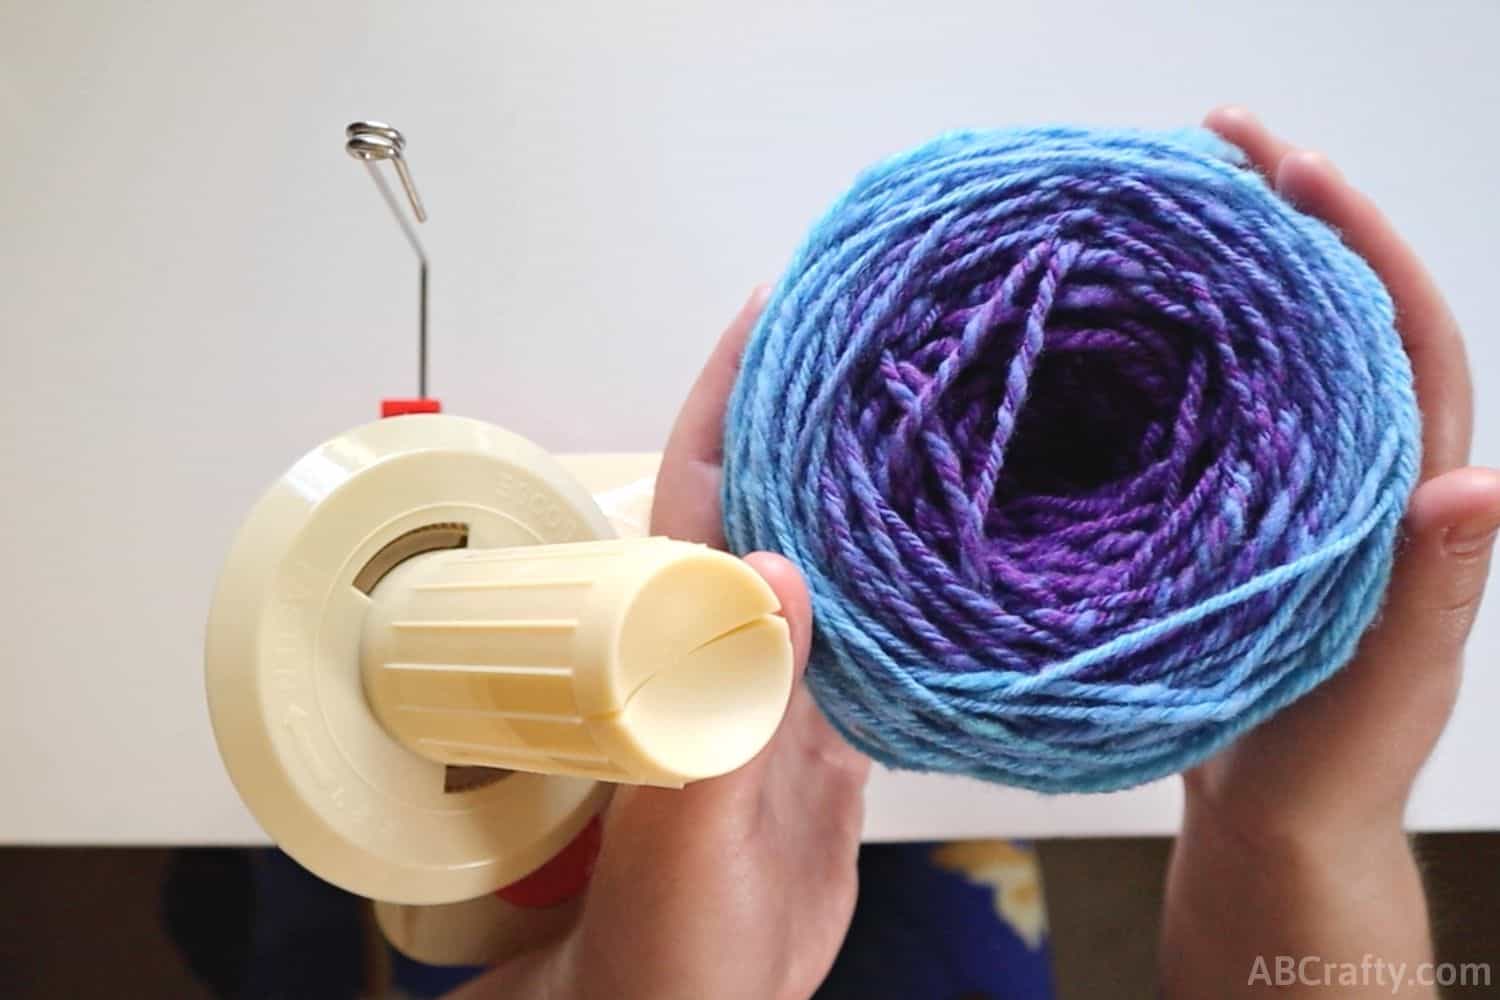 What is the best yarn winder? - Quora